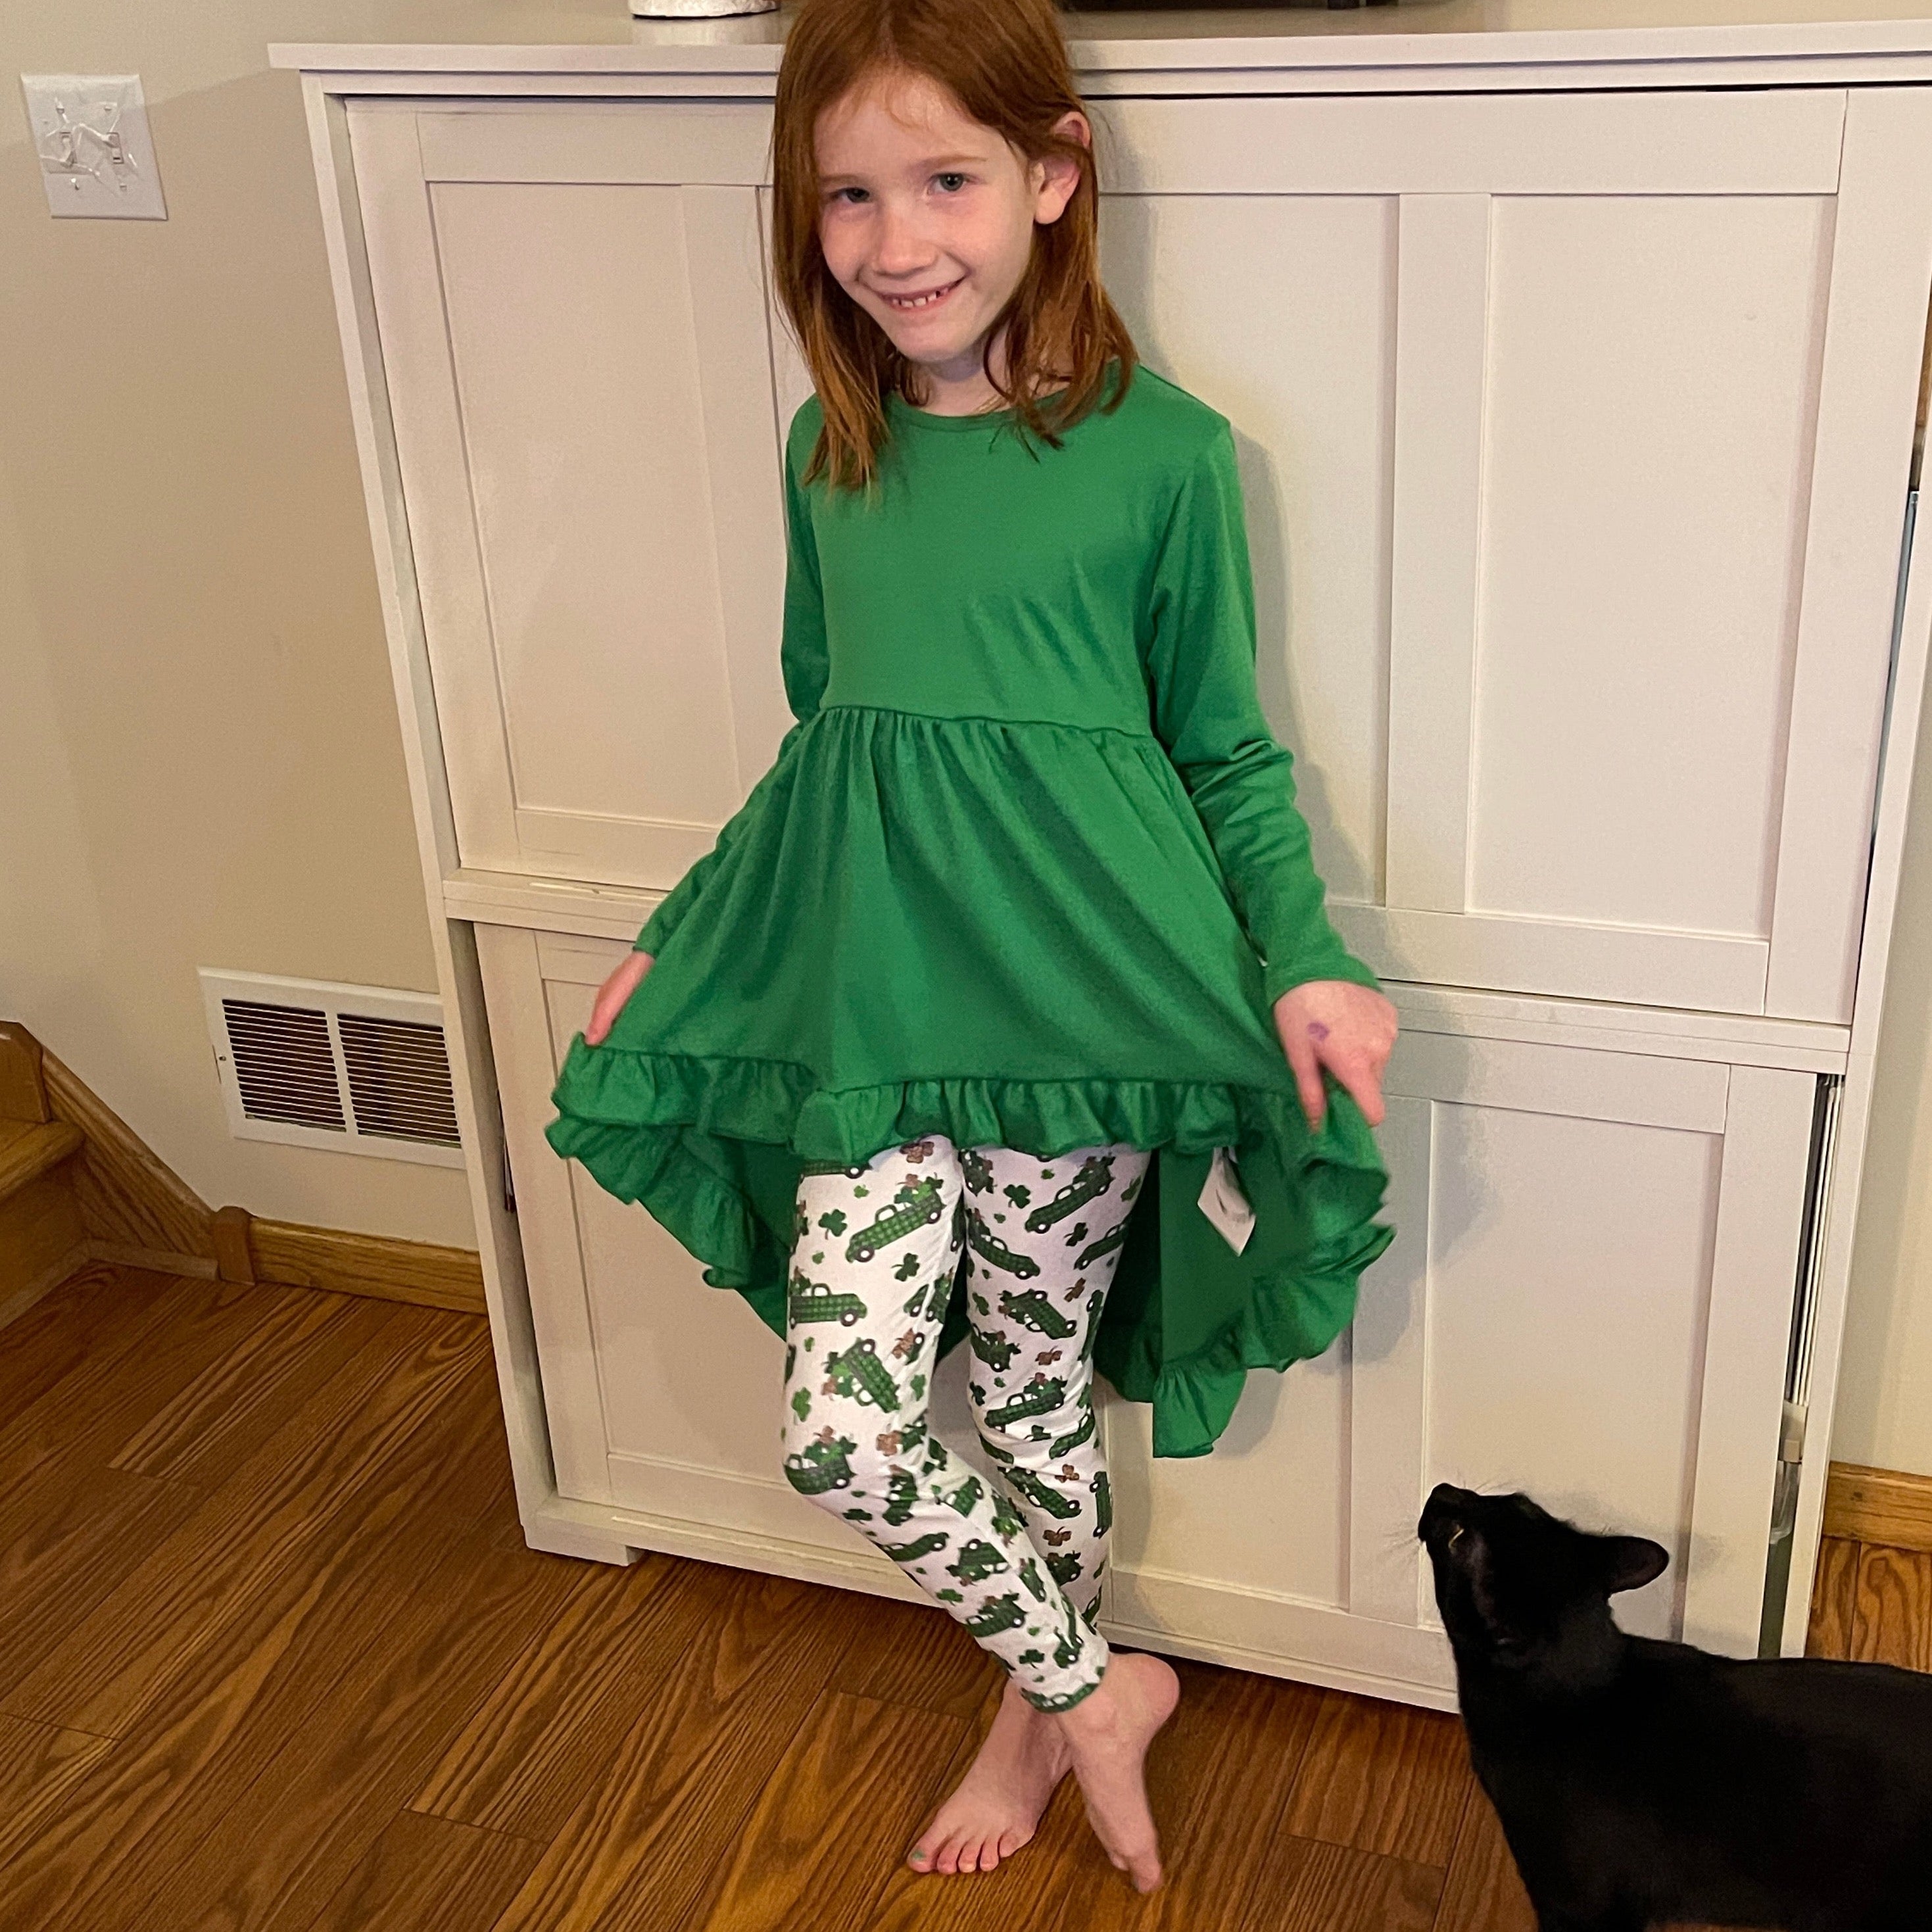 #St. Patrick's Day Outfit Dress Just For Littles™ 